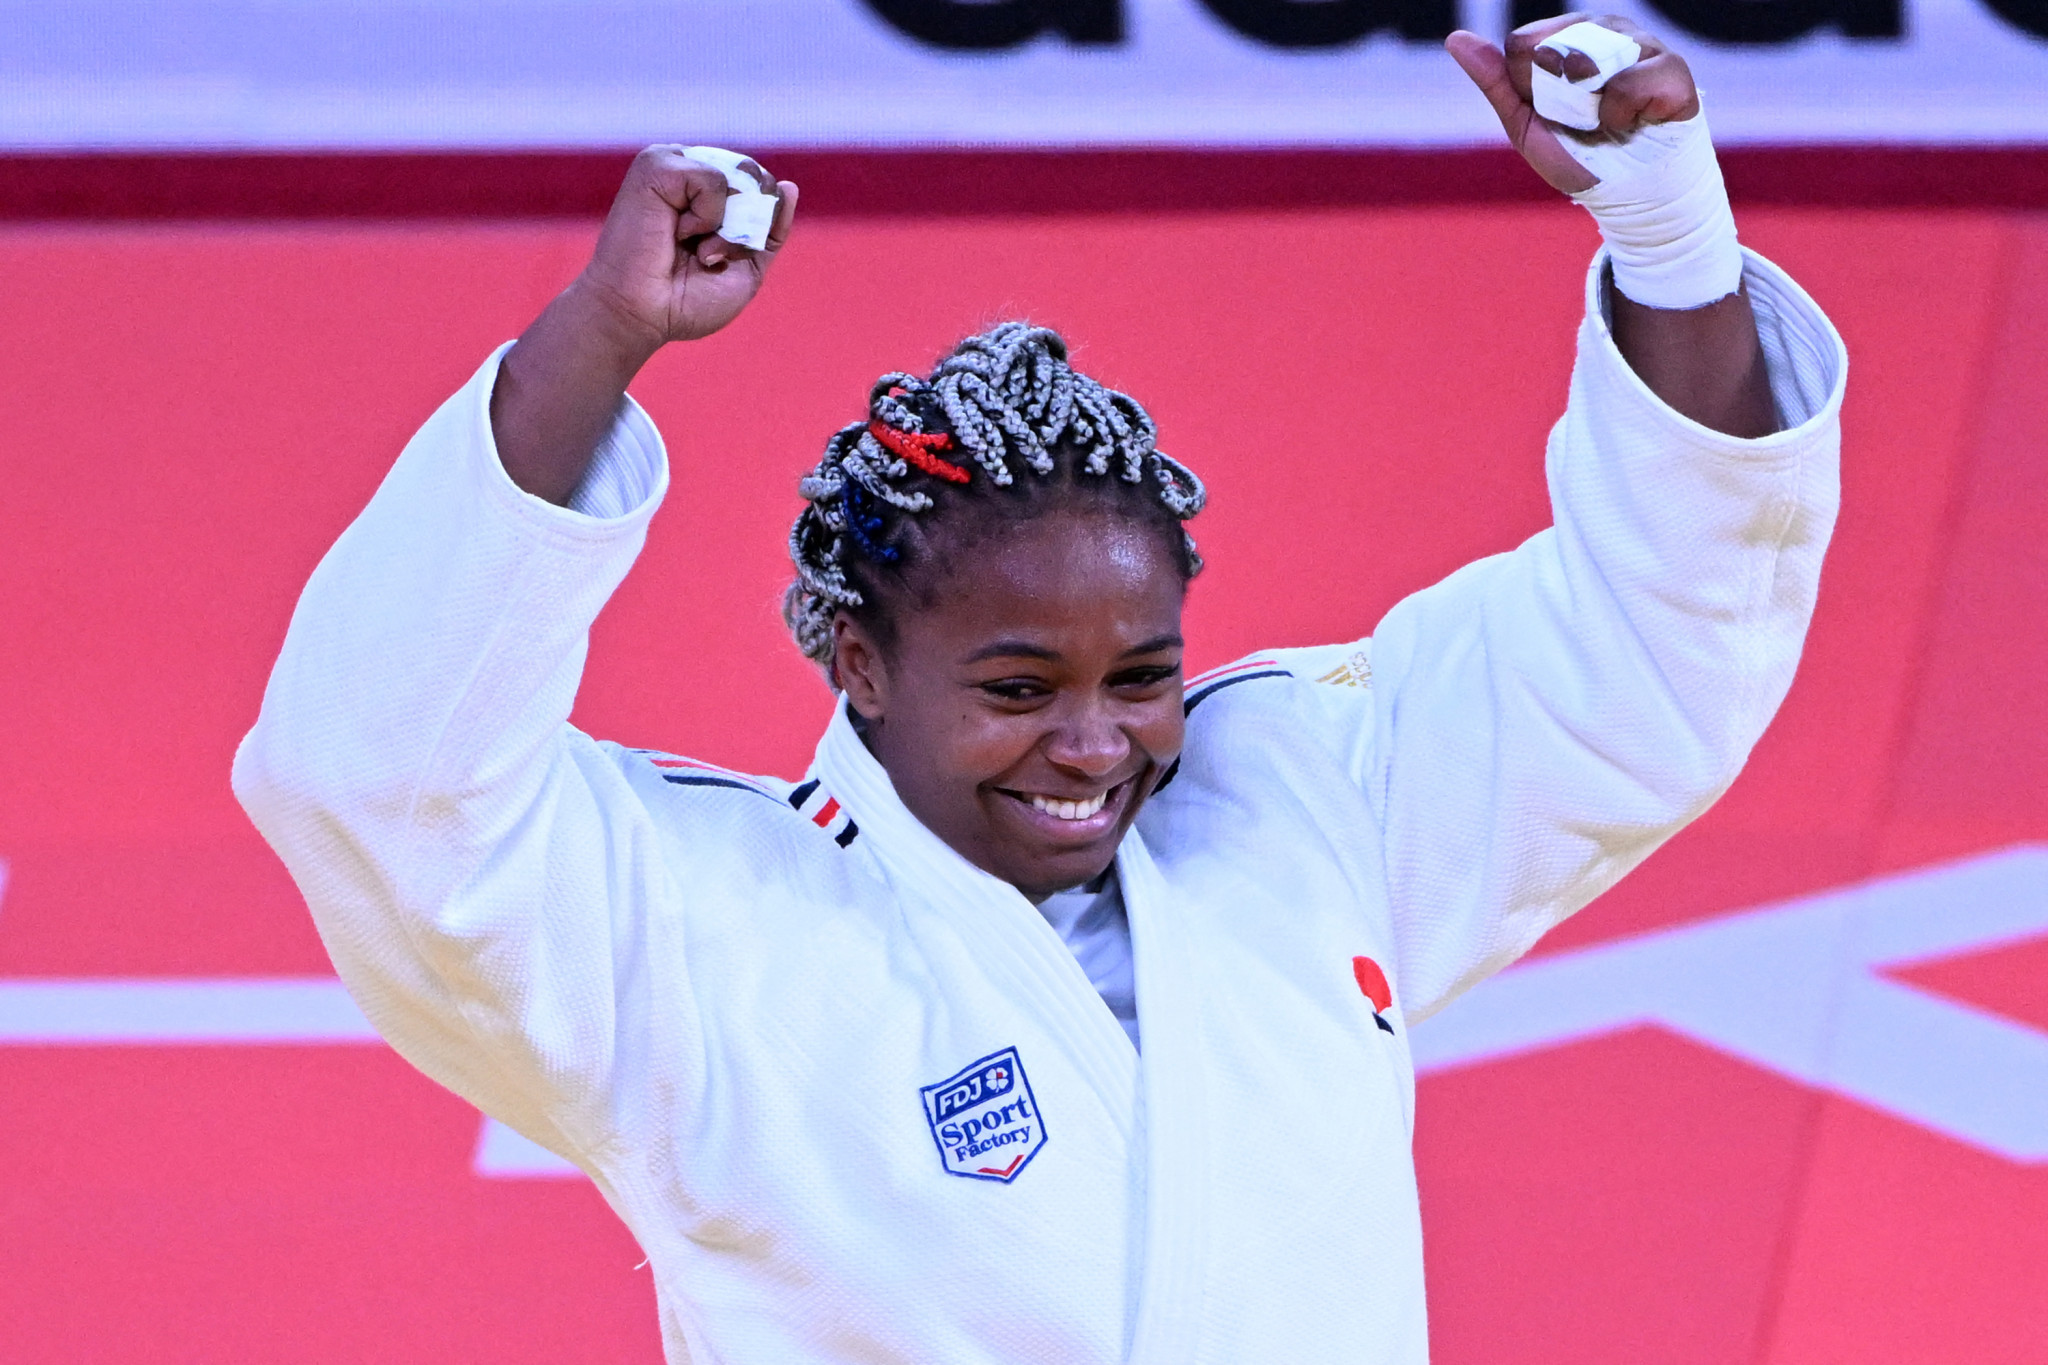 Romane Dicko won her first world title and France's first gold in Tashkent in the women's over-78kg final ©Getty Images